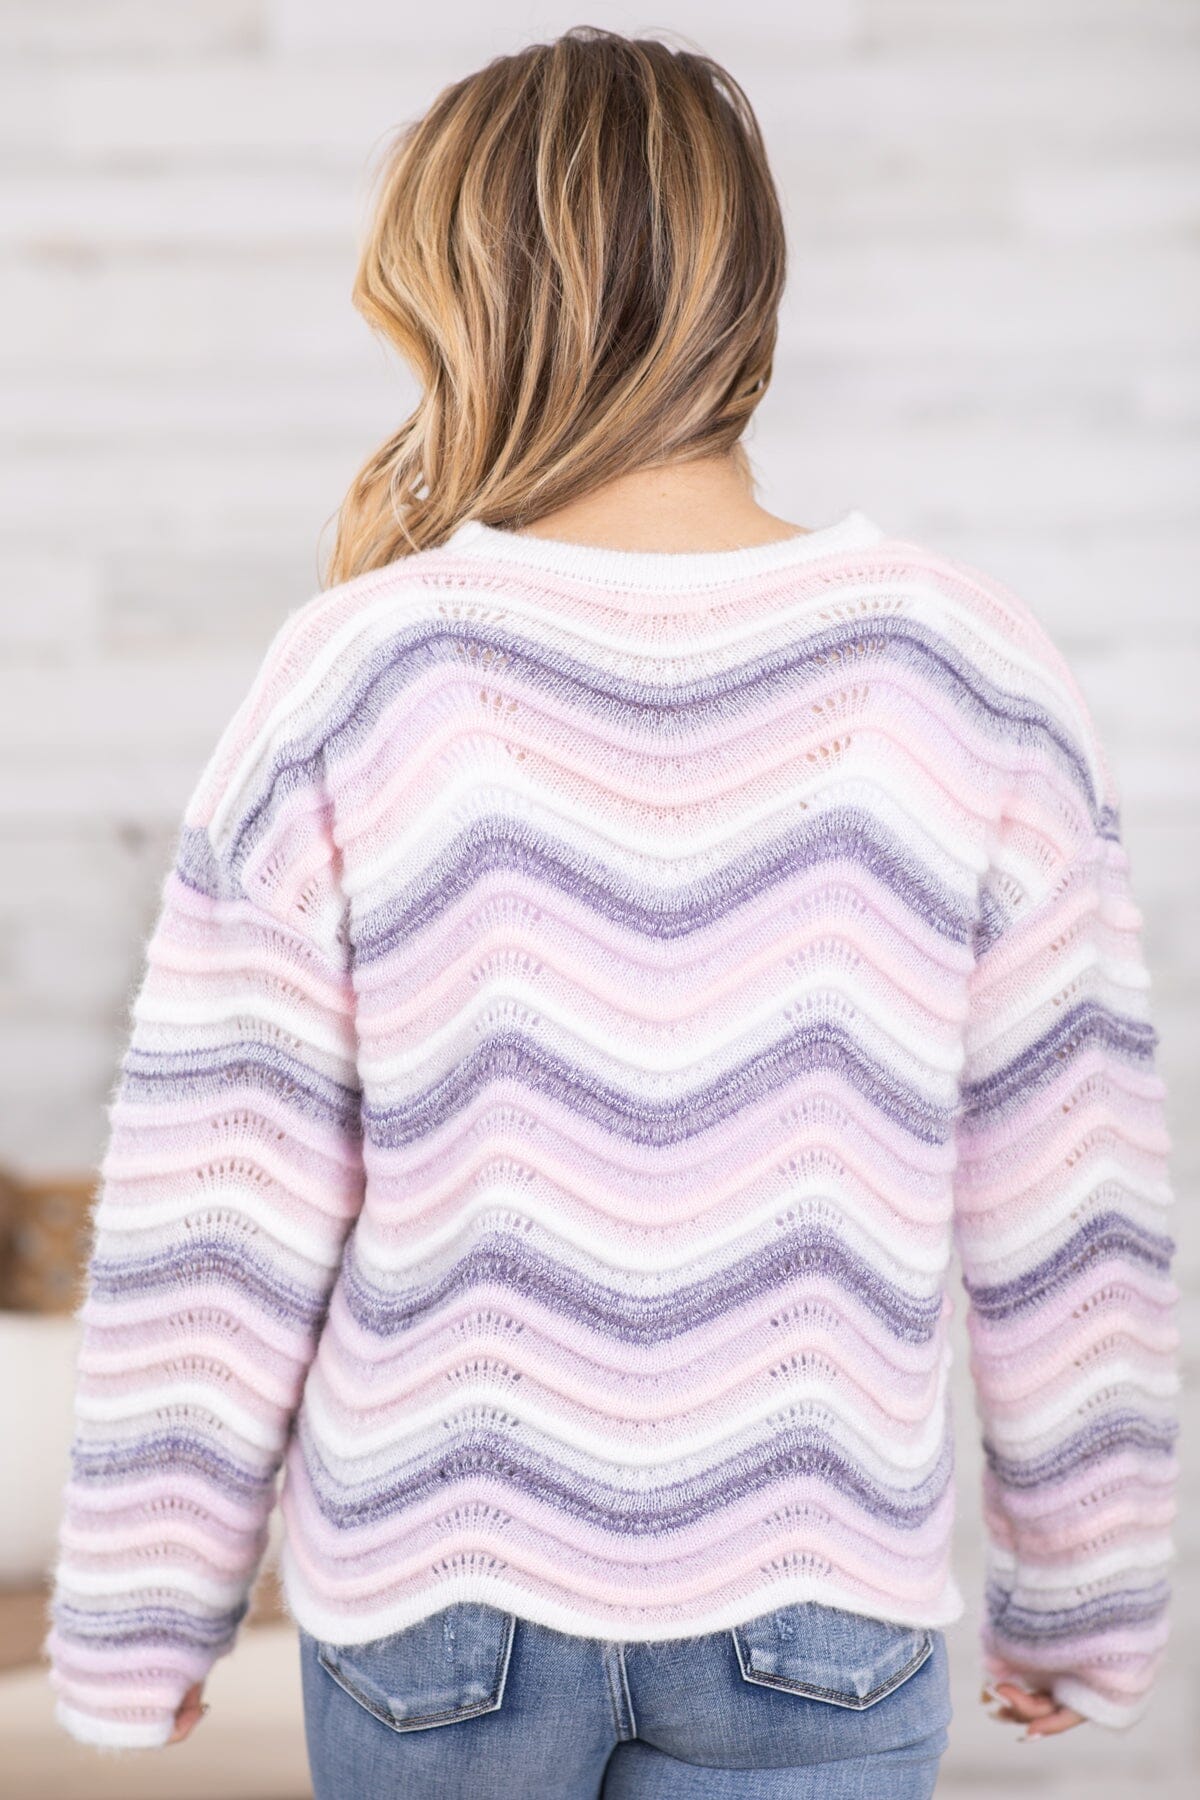 Lavender and Baby Pink Chevron Stripe Sweater - Filly Flair